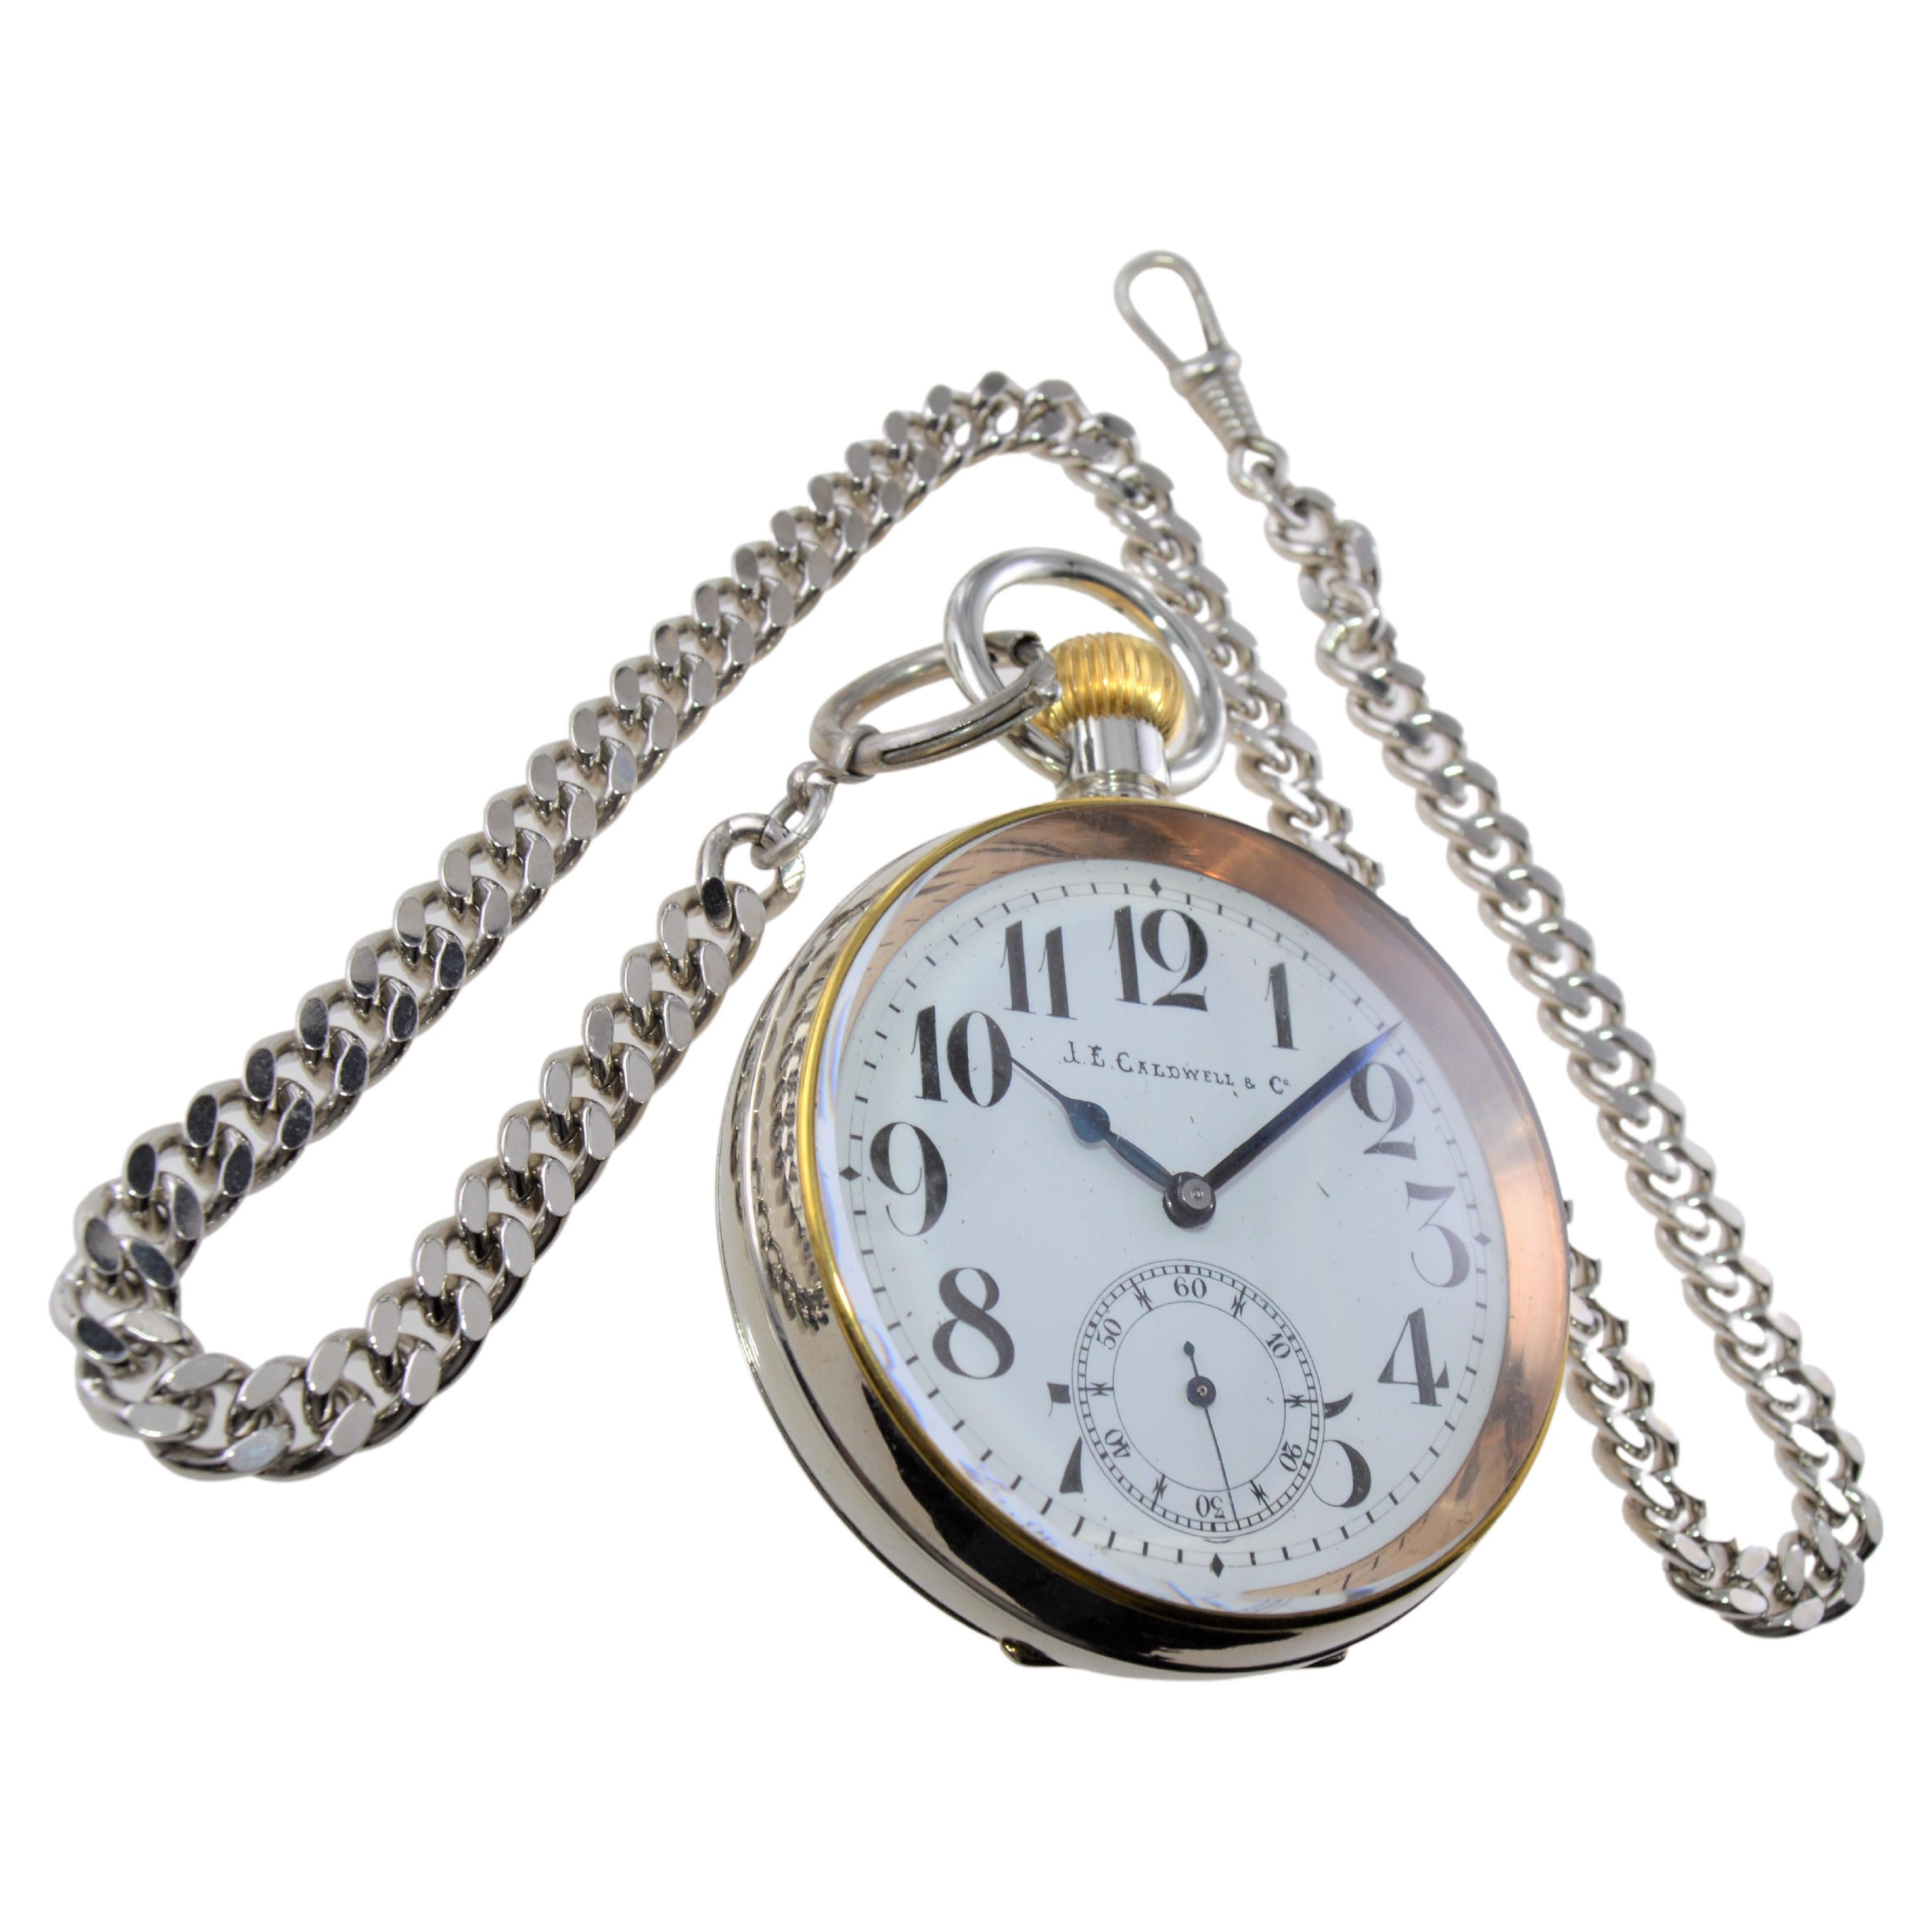 J.E Caldwaell & Co. Nickel Silver Oversized Pocket Watch with Enamel Dial For Sale